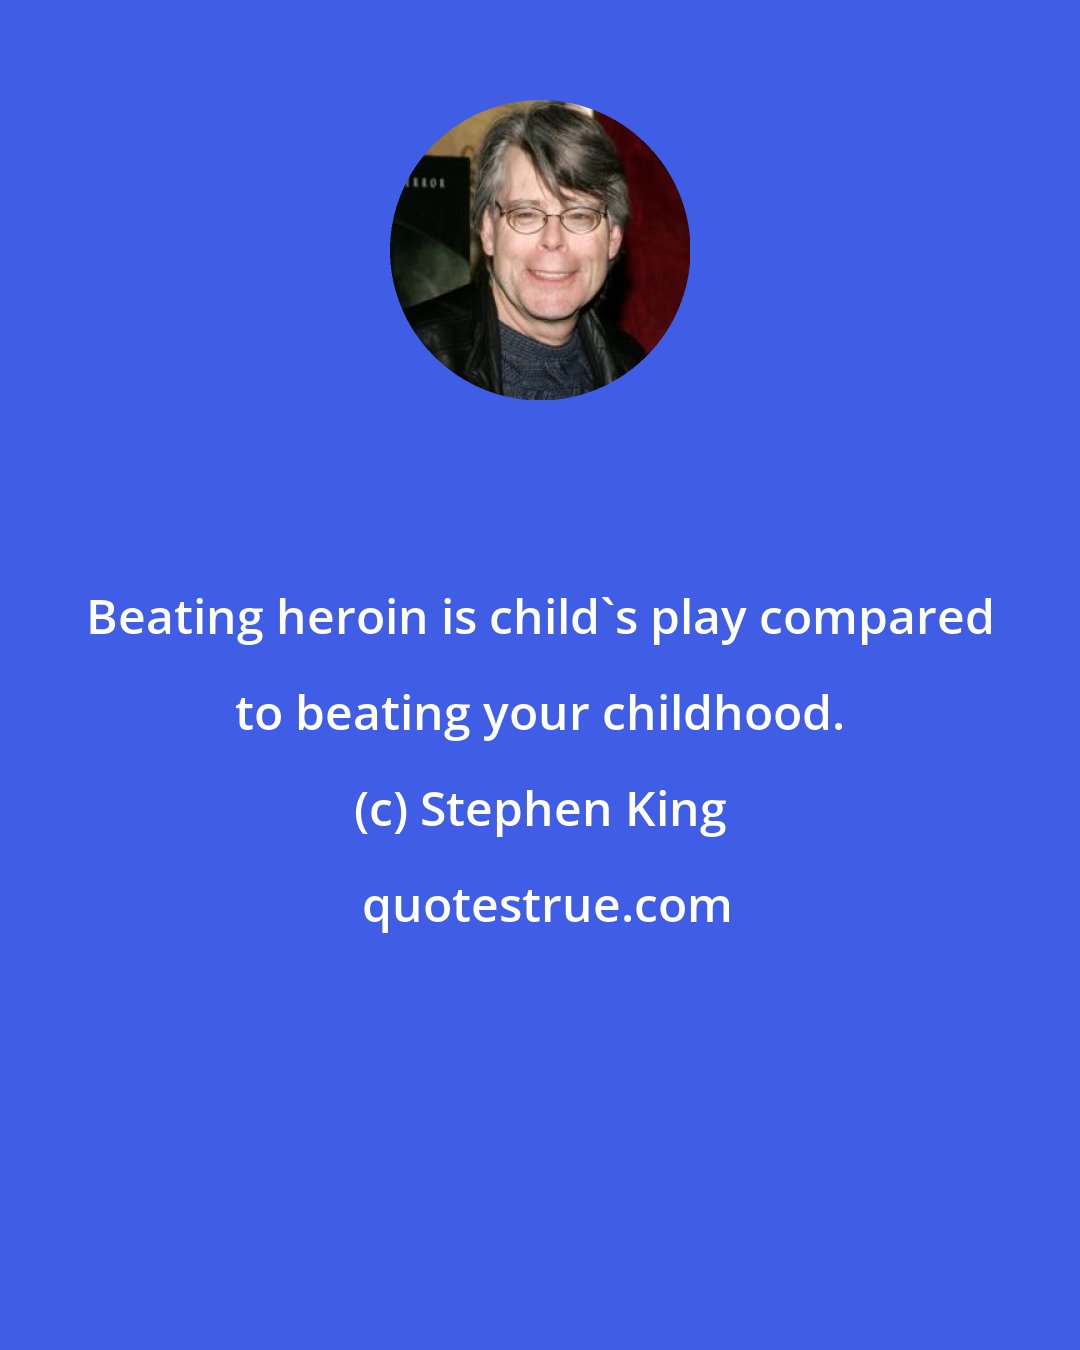 Stephen King: Beating heroin is child's play compared to beating your childhood.